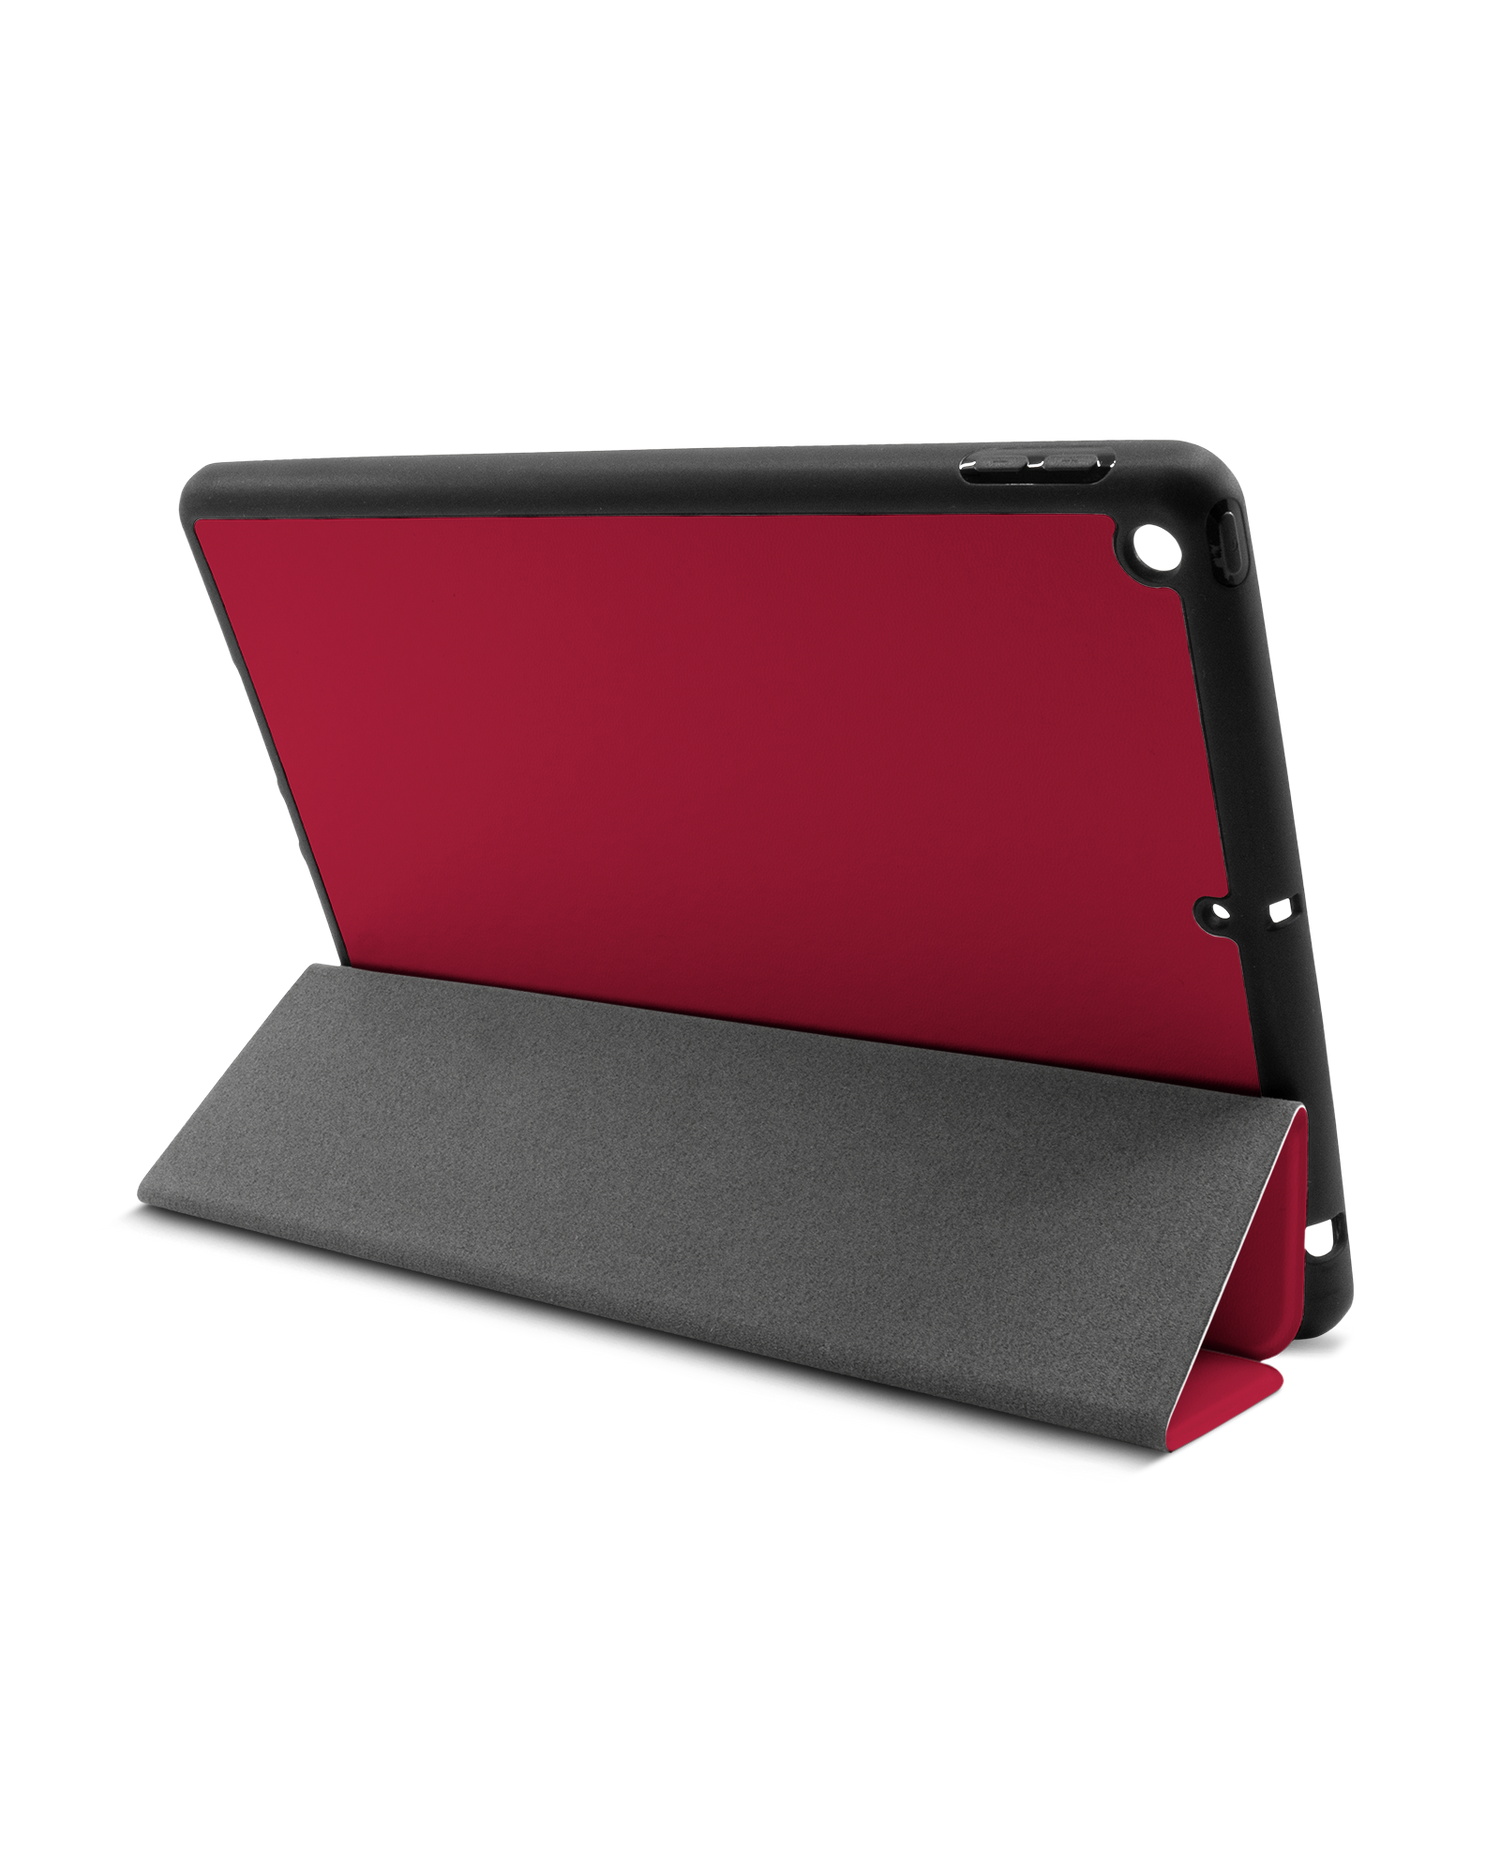 RED iPad Case with Pencil Holder Apple iPad 9 10.2